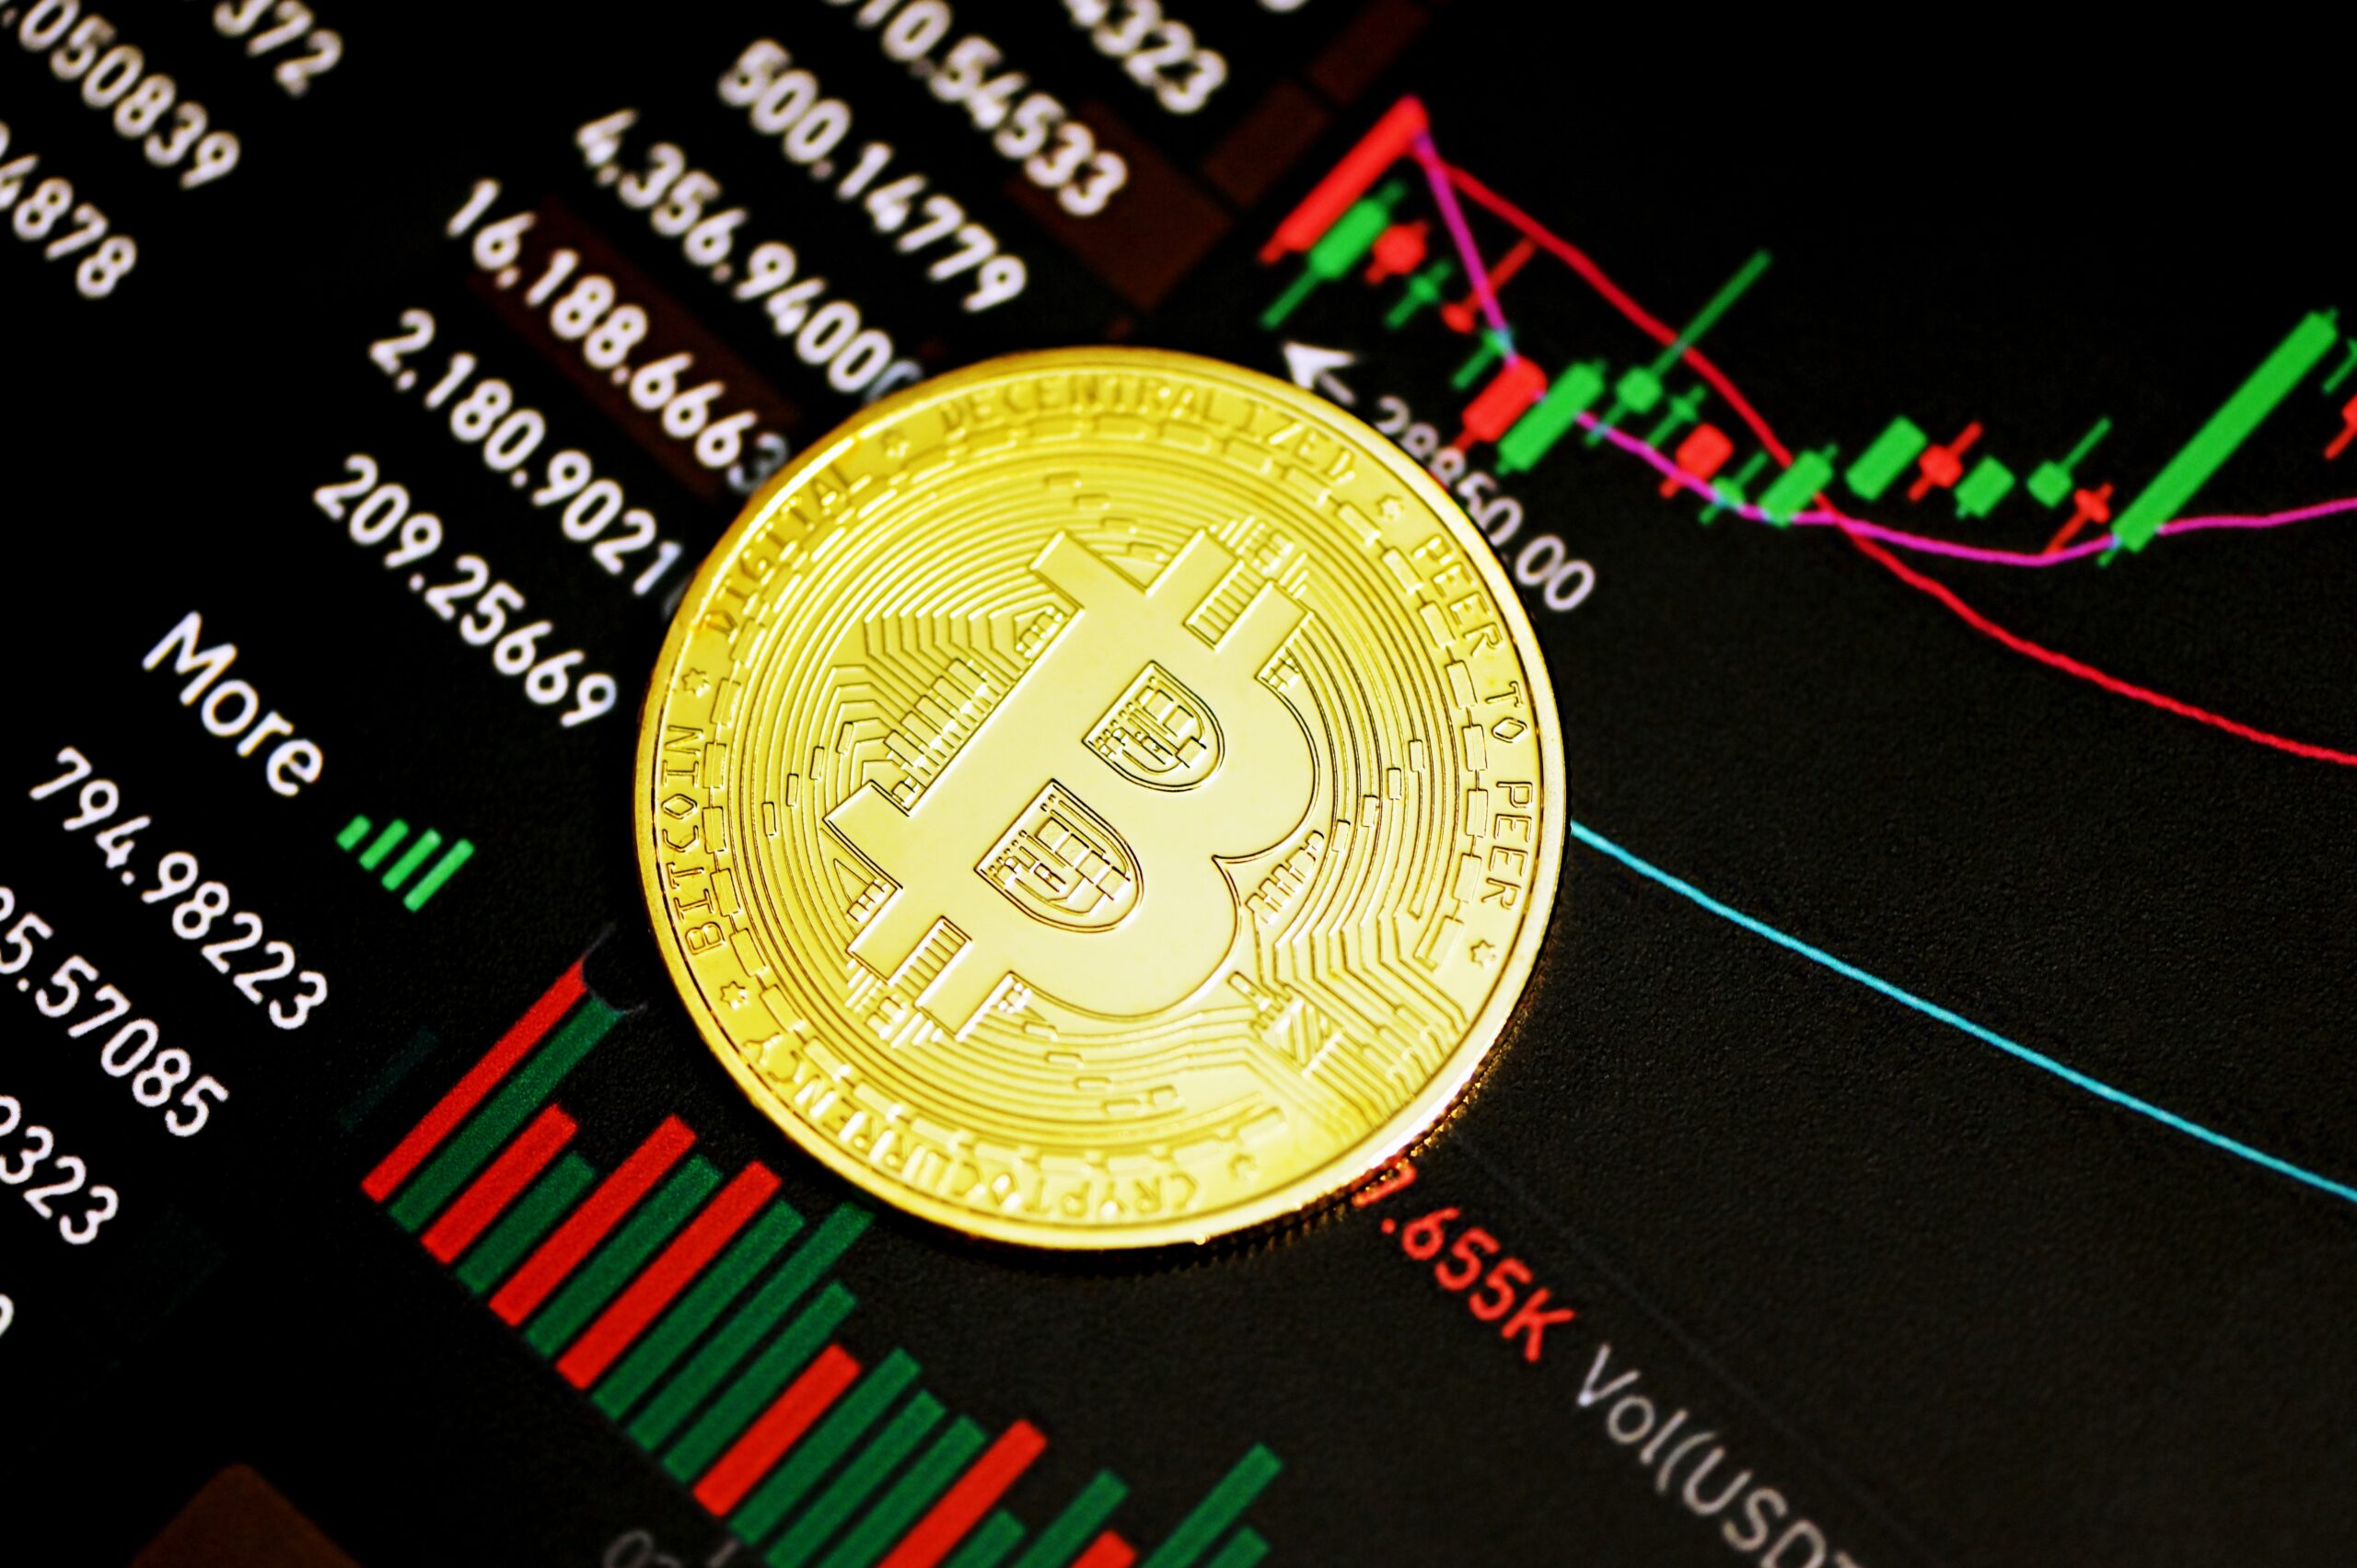 Bitcoin’s Uncertain Path: The Bull Trap Warning and ETF Speculation